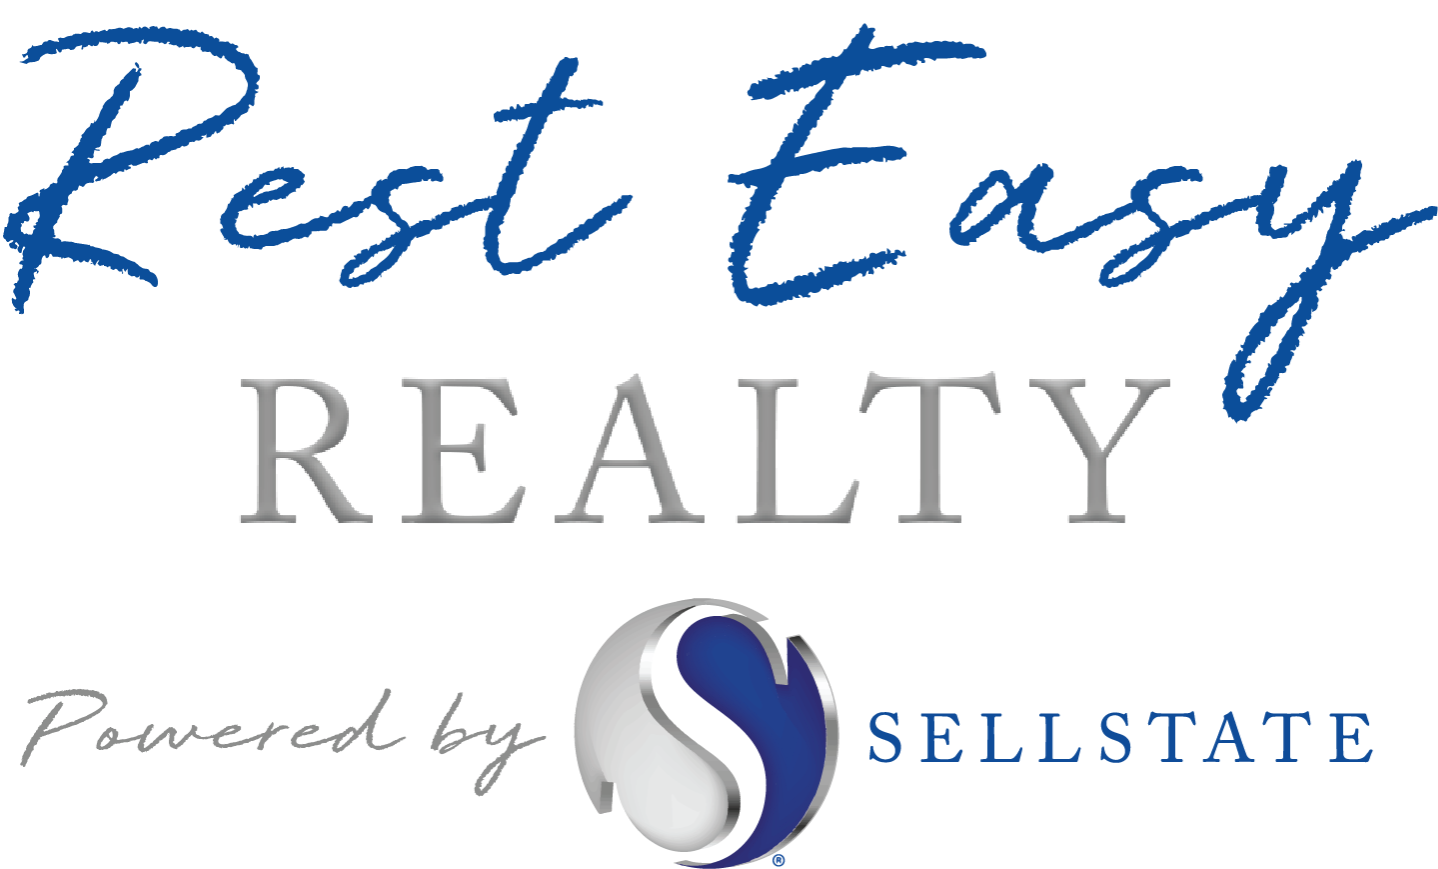 Rest Easy Realty – Florida's Finest Real Estate Firm